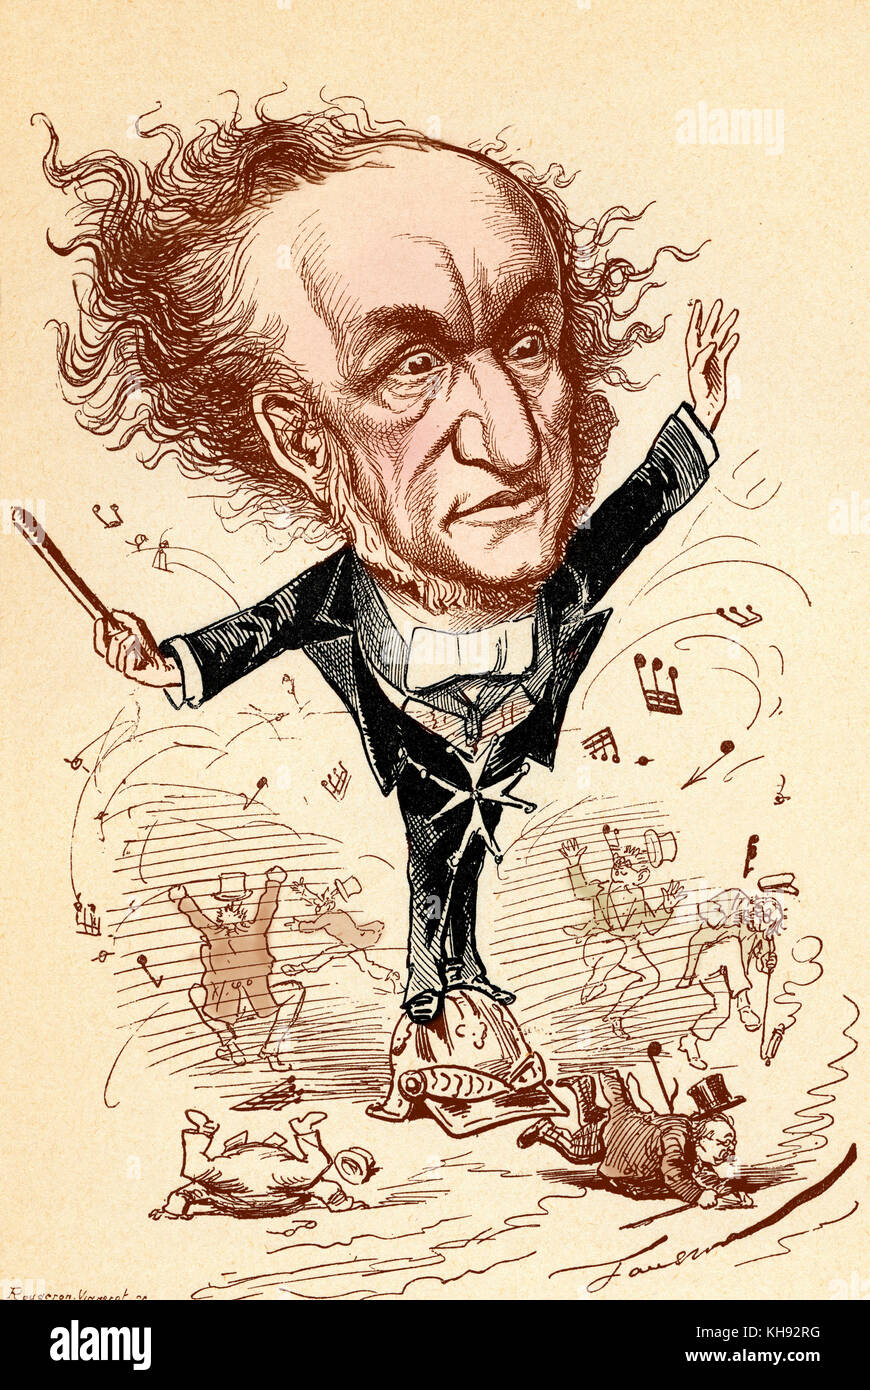 Richard Wagner -  portrait' by Faustin. Wagner is conducting on a Prussian military helmet. Published Figaro, London, 20 September 1876. Allusion to Franco  - Prussian War? Stock Photo